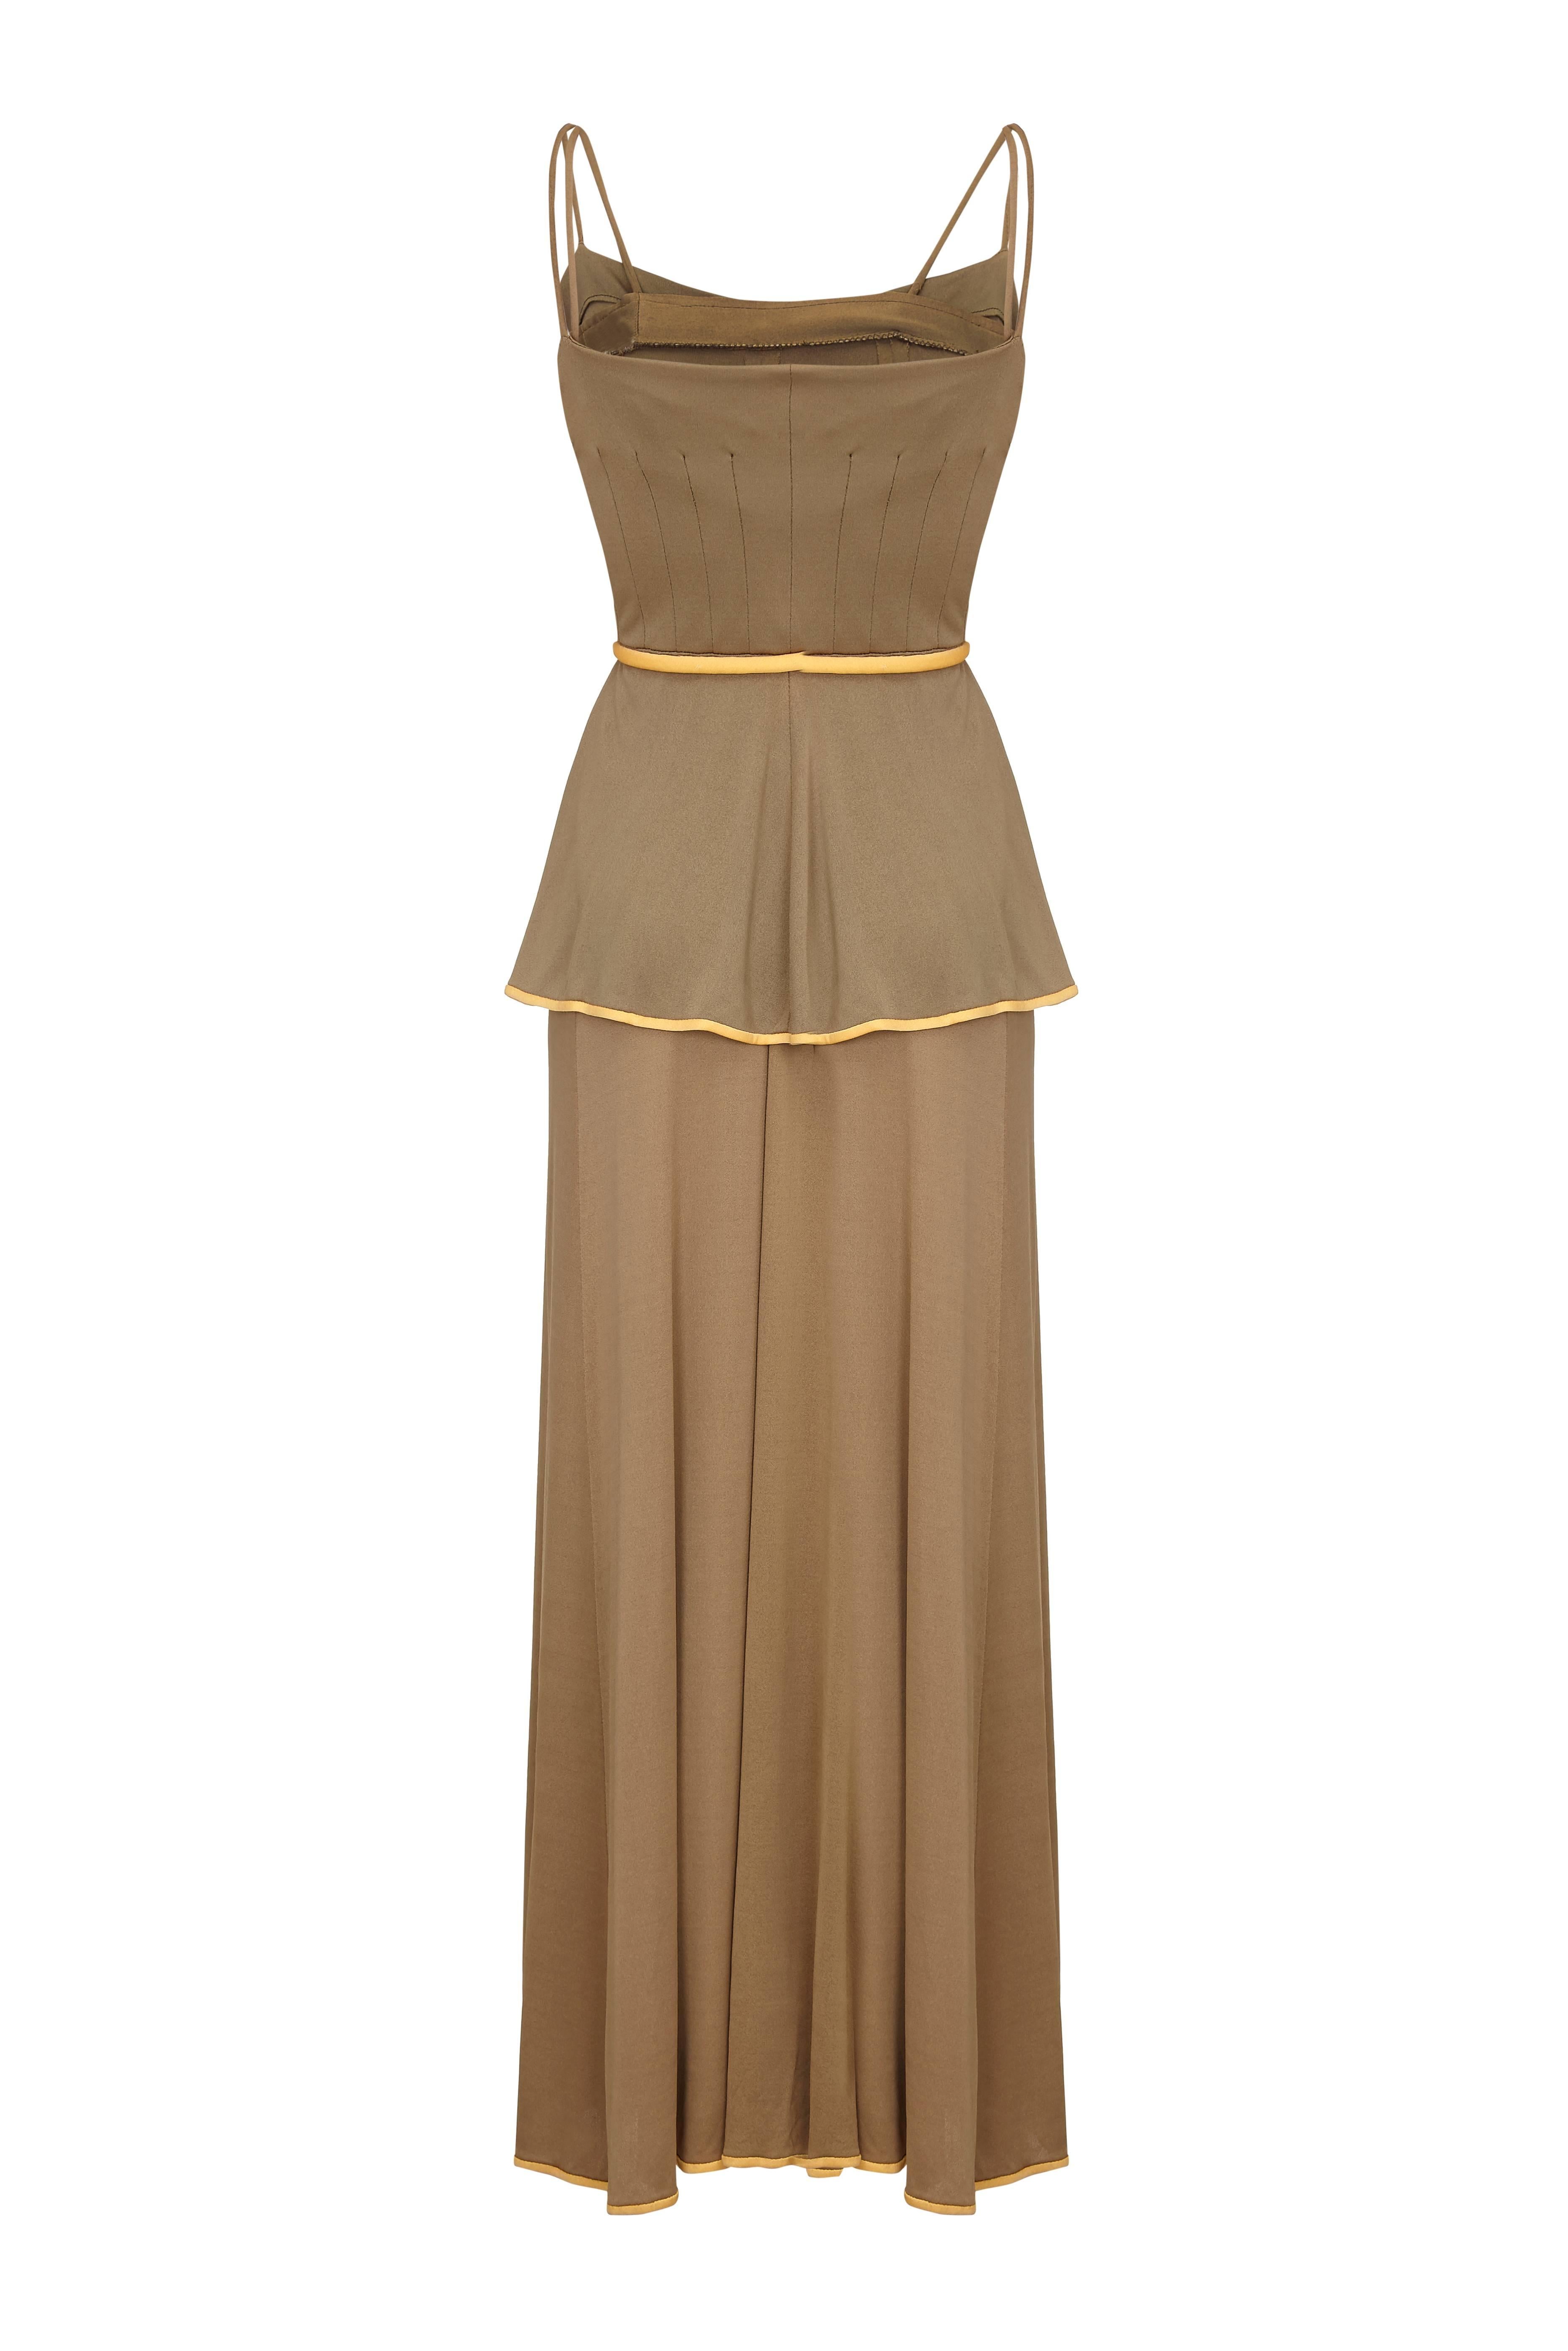 This charming  1970s olive toned silk jersey peasant style 2 piece is by American label Horiko for Saks 5th Avenue.  It is comprised of a floor length maxi skirt and strappy peasant vest with a pretty peplum waist.  
Both pieces feature piped seams